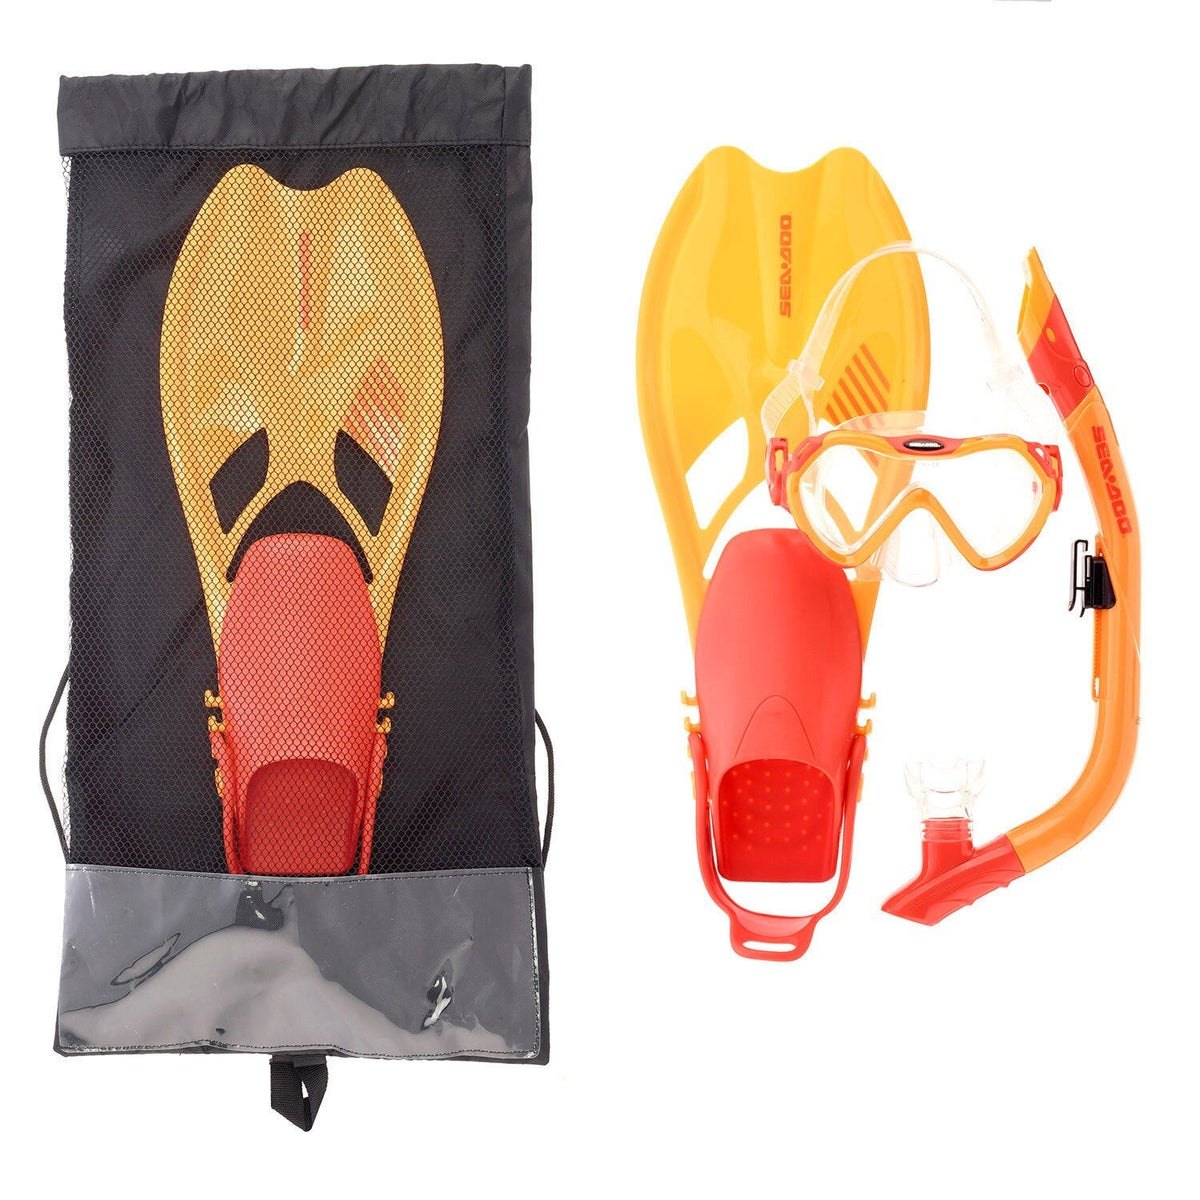 Youth Snorkeling Set / 9 to 13